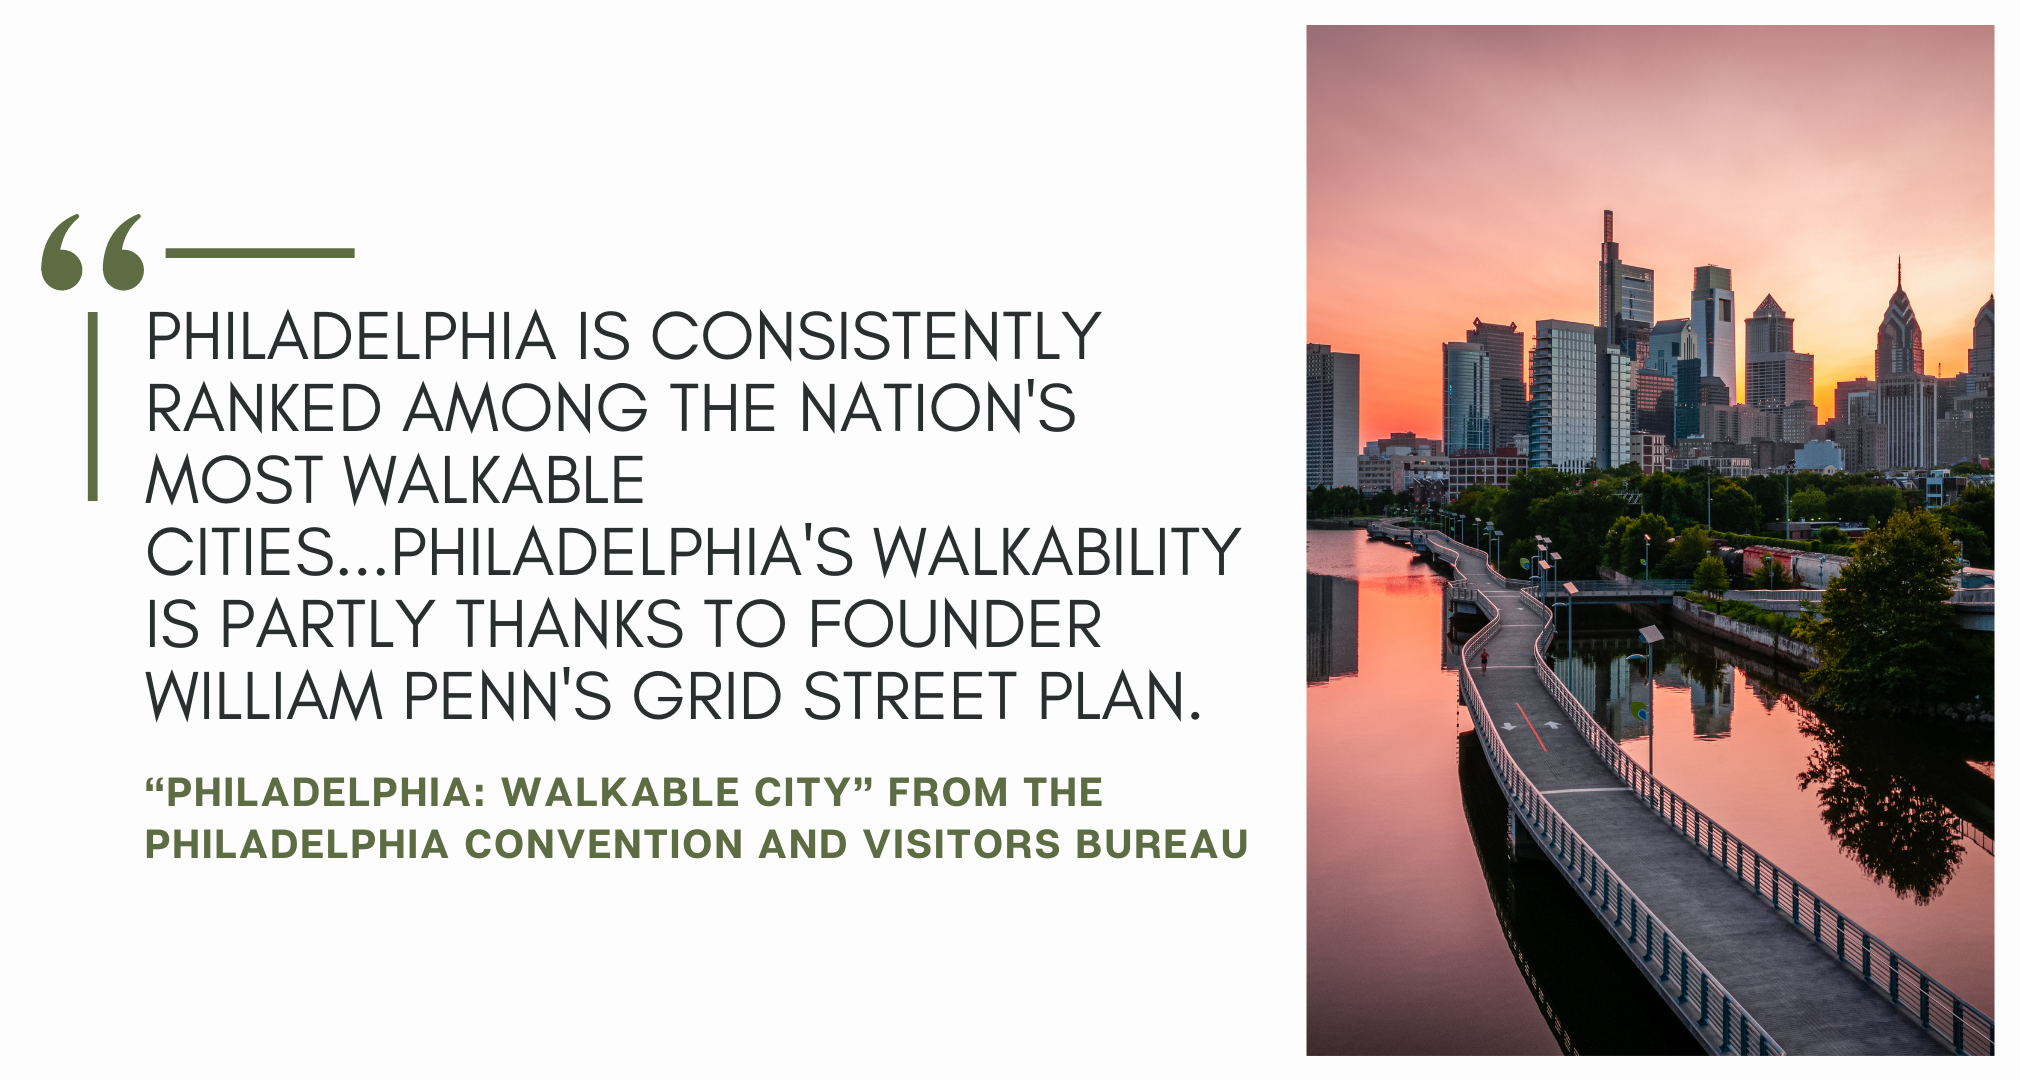 Philadelphia is one of the countries most walkable cities